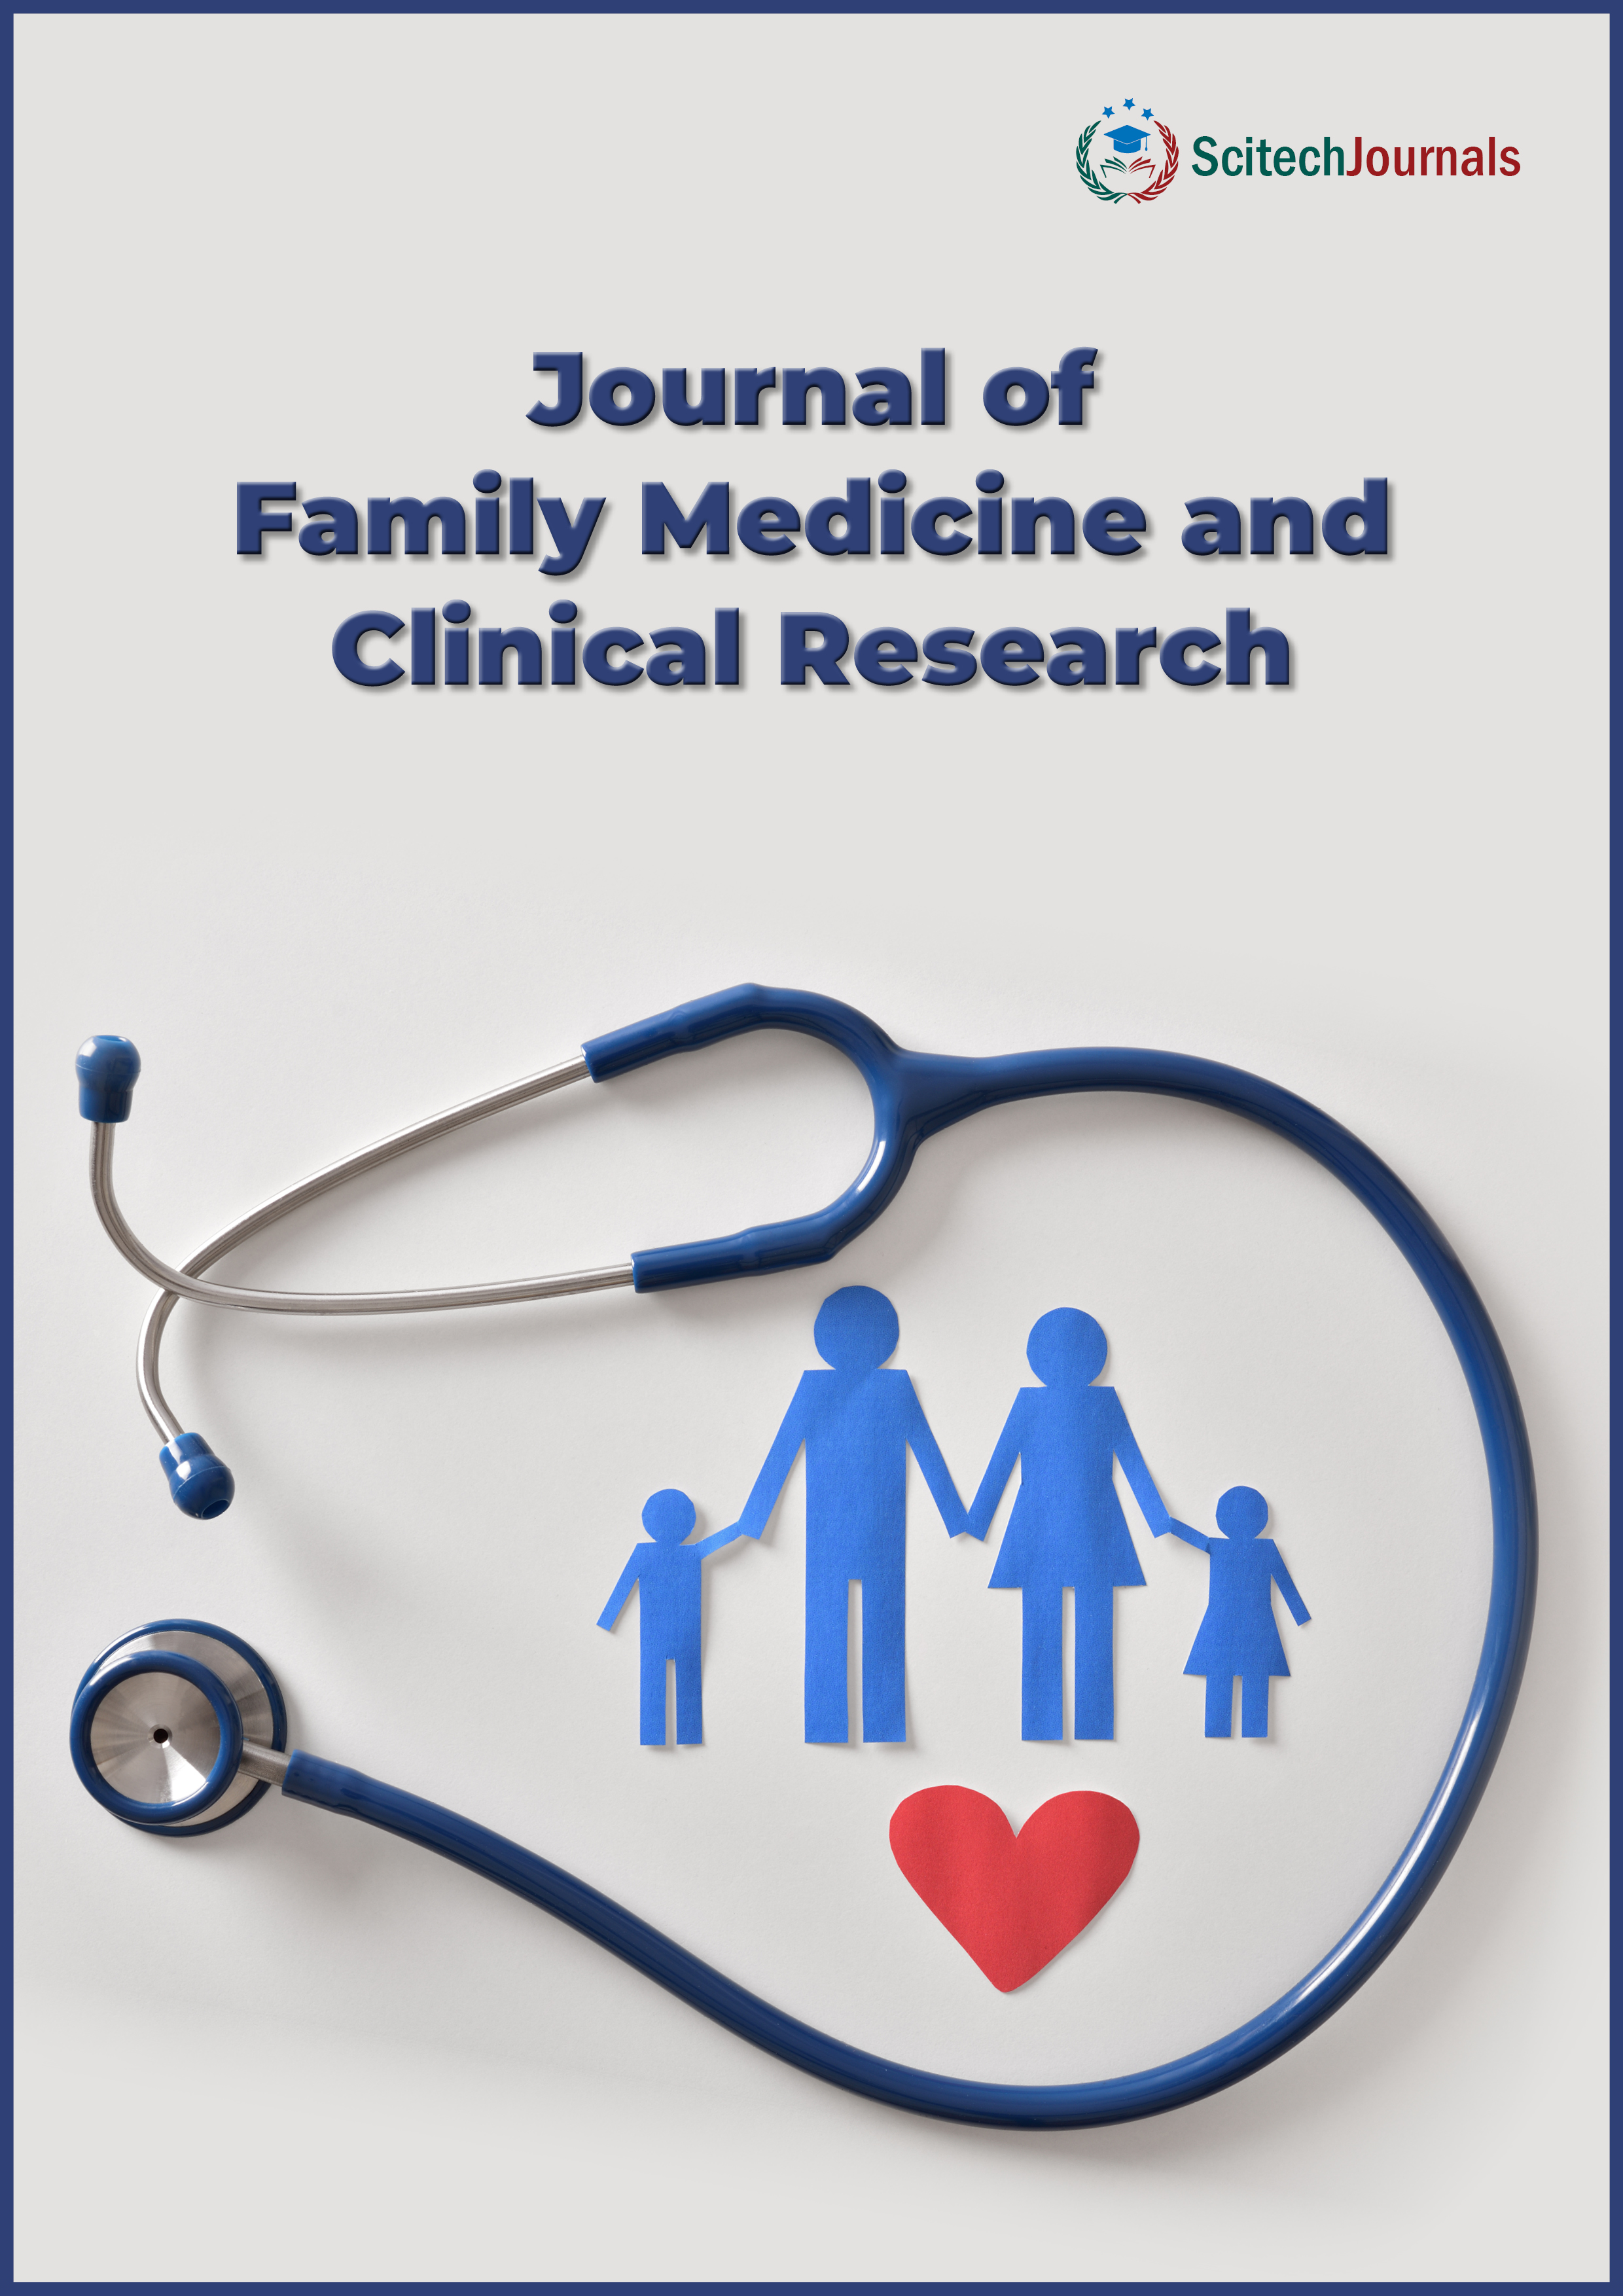 Journal of Family Medicine and Clinical Research